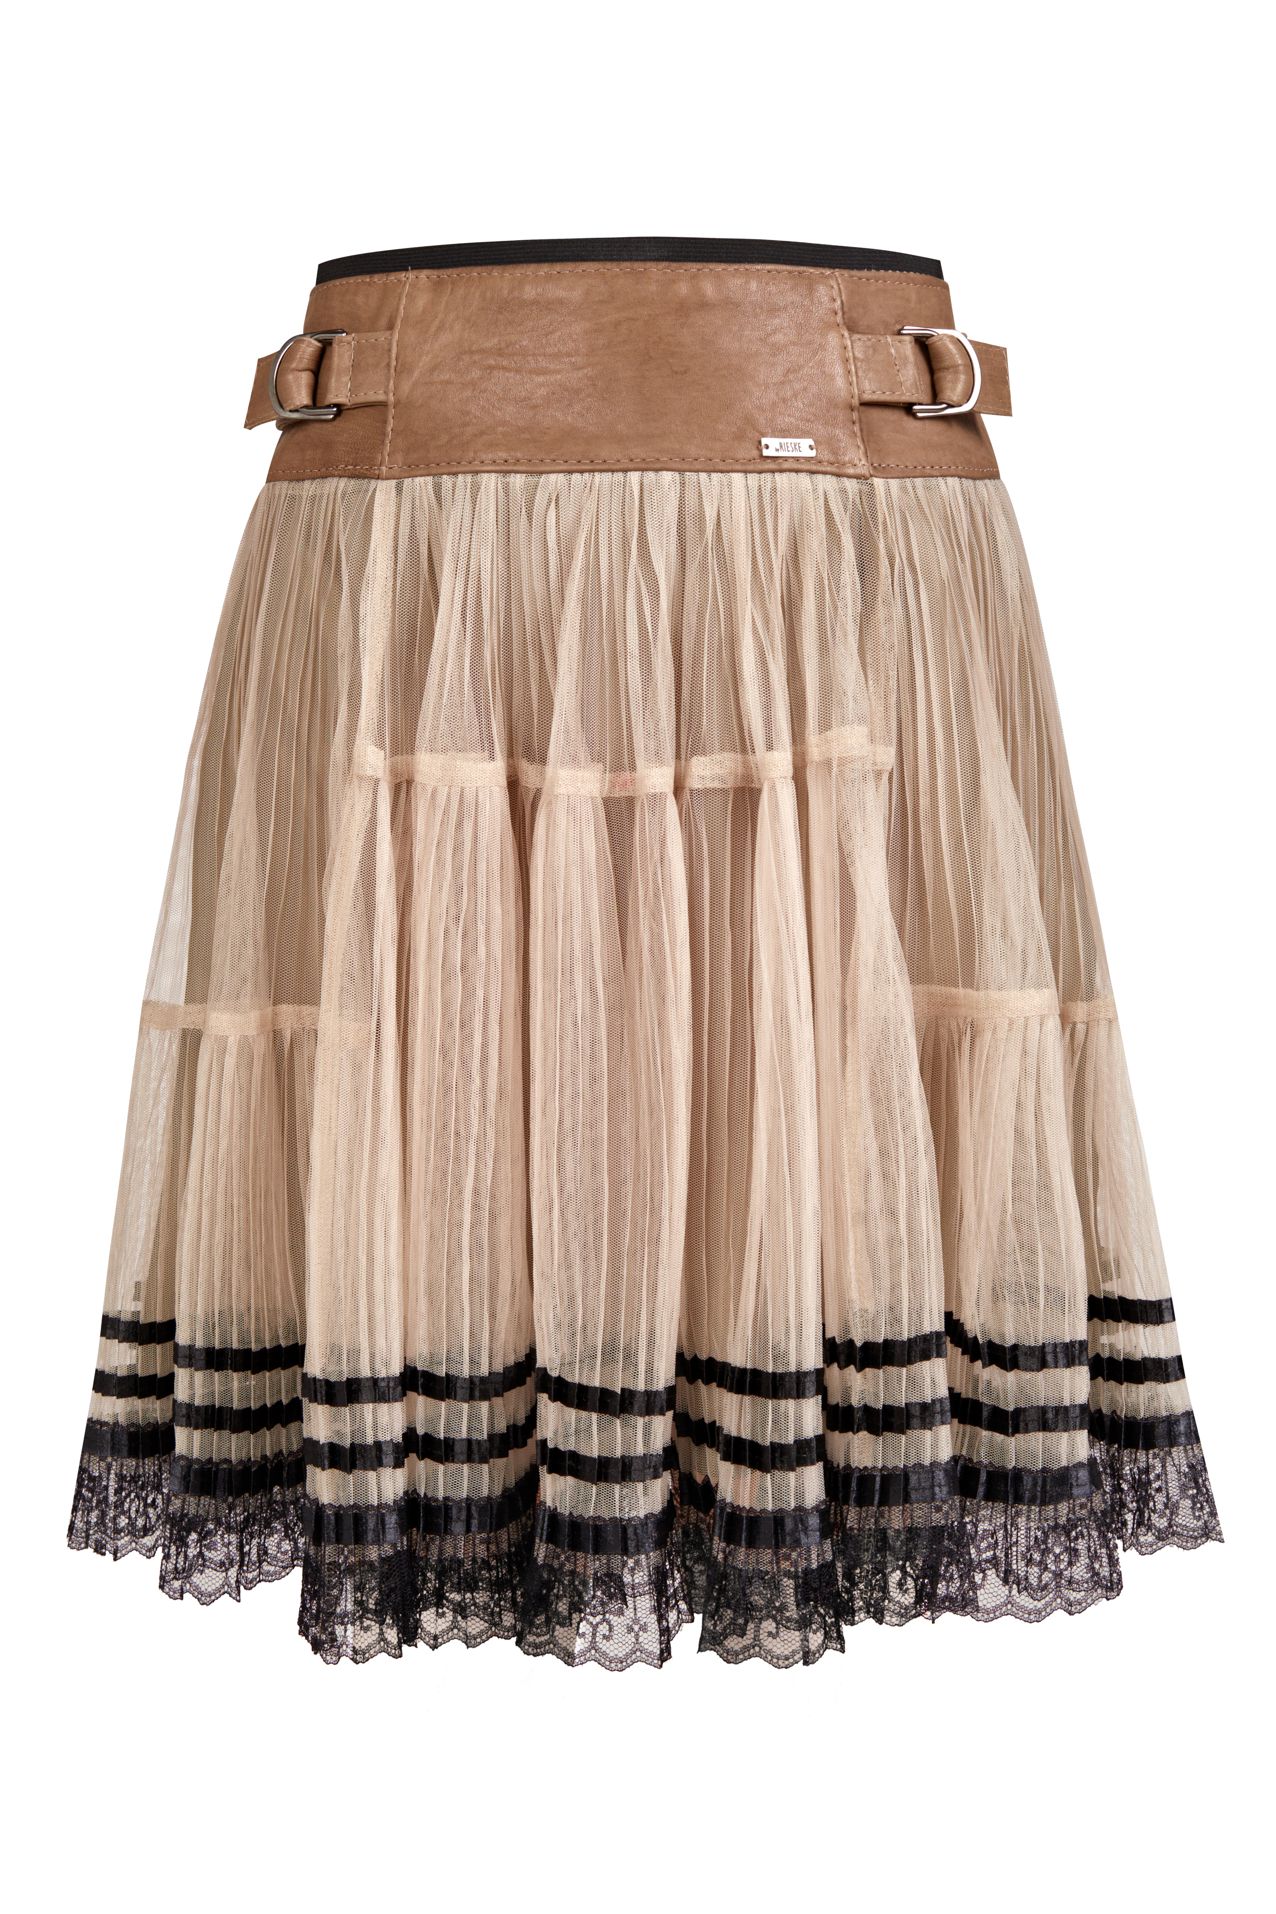 tulle and leather skirt, tulle skirt with leather yoke and belt, skirt with yoke and Italian leather strap, skirt with yoke of natural leather and tulle, ecru skirt with natural  brown leather yoke, skirt polish brand, made in poland skirt